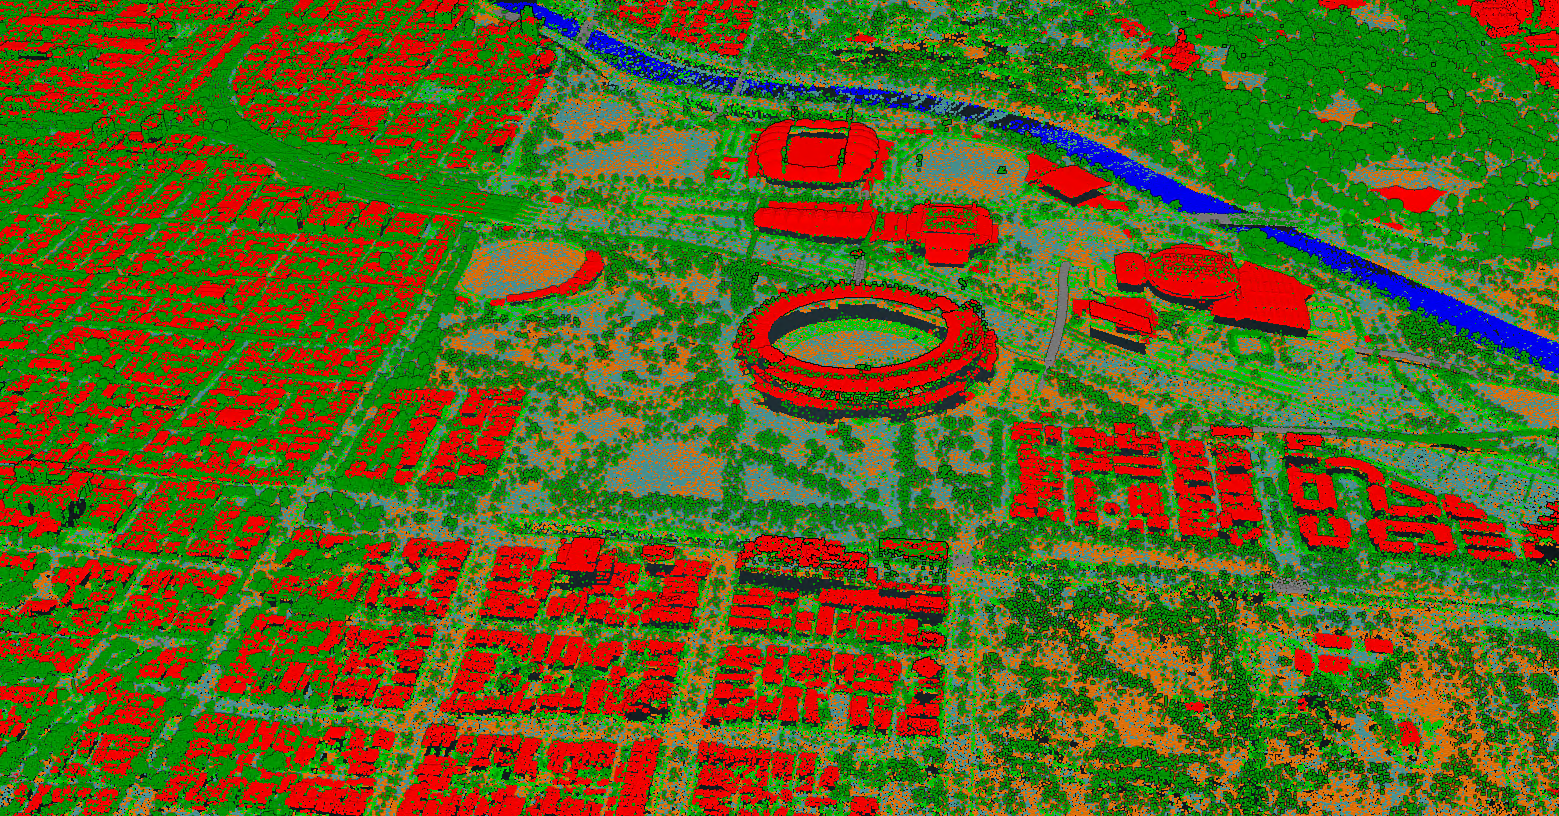 An aerial LiDAR capture over greater Melbourne looking diagonally down across East Melbourne, Fitzroy Gardens, MCG and the Yarra River. Water is shaded in blue, built structures in red, ground surfaces in oranges and greys, and plant growth in green.